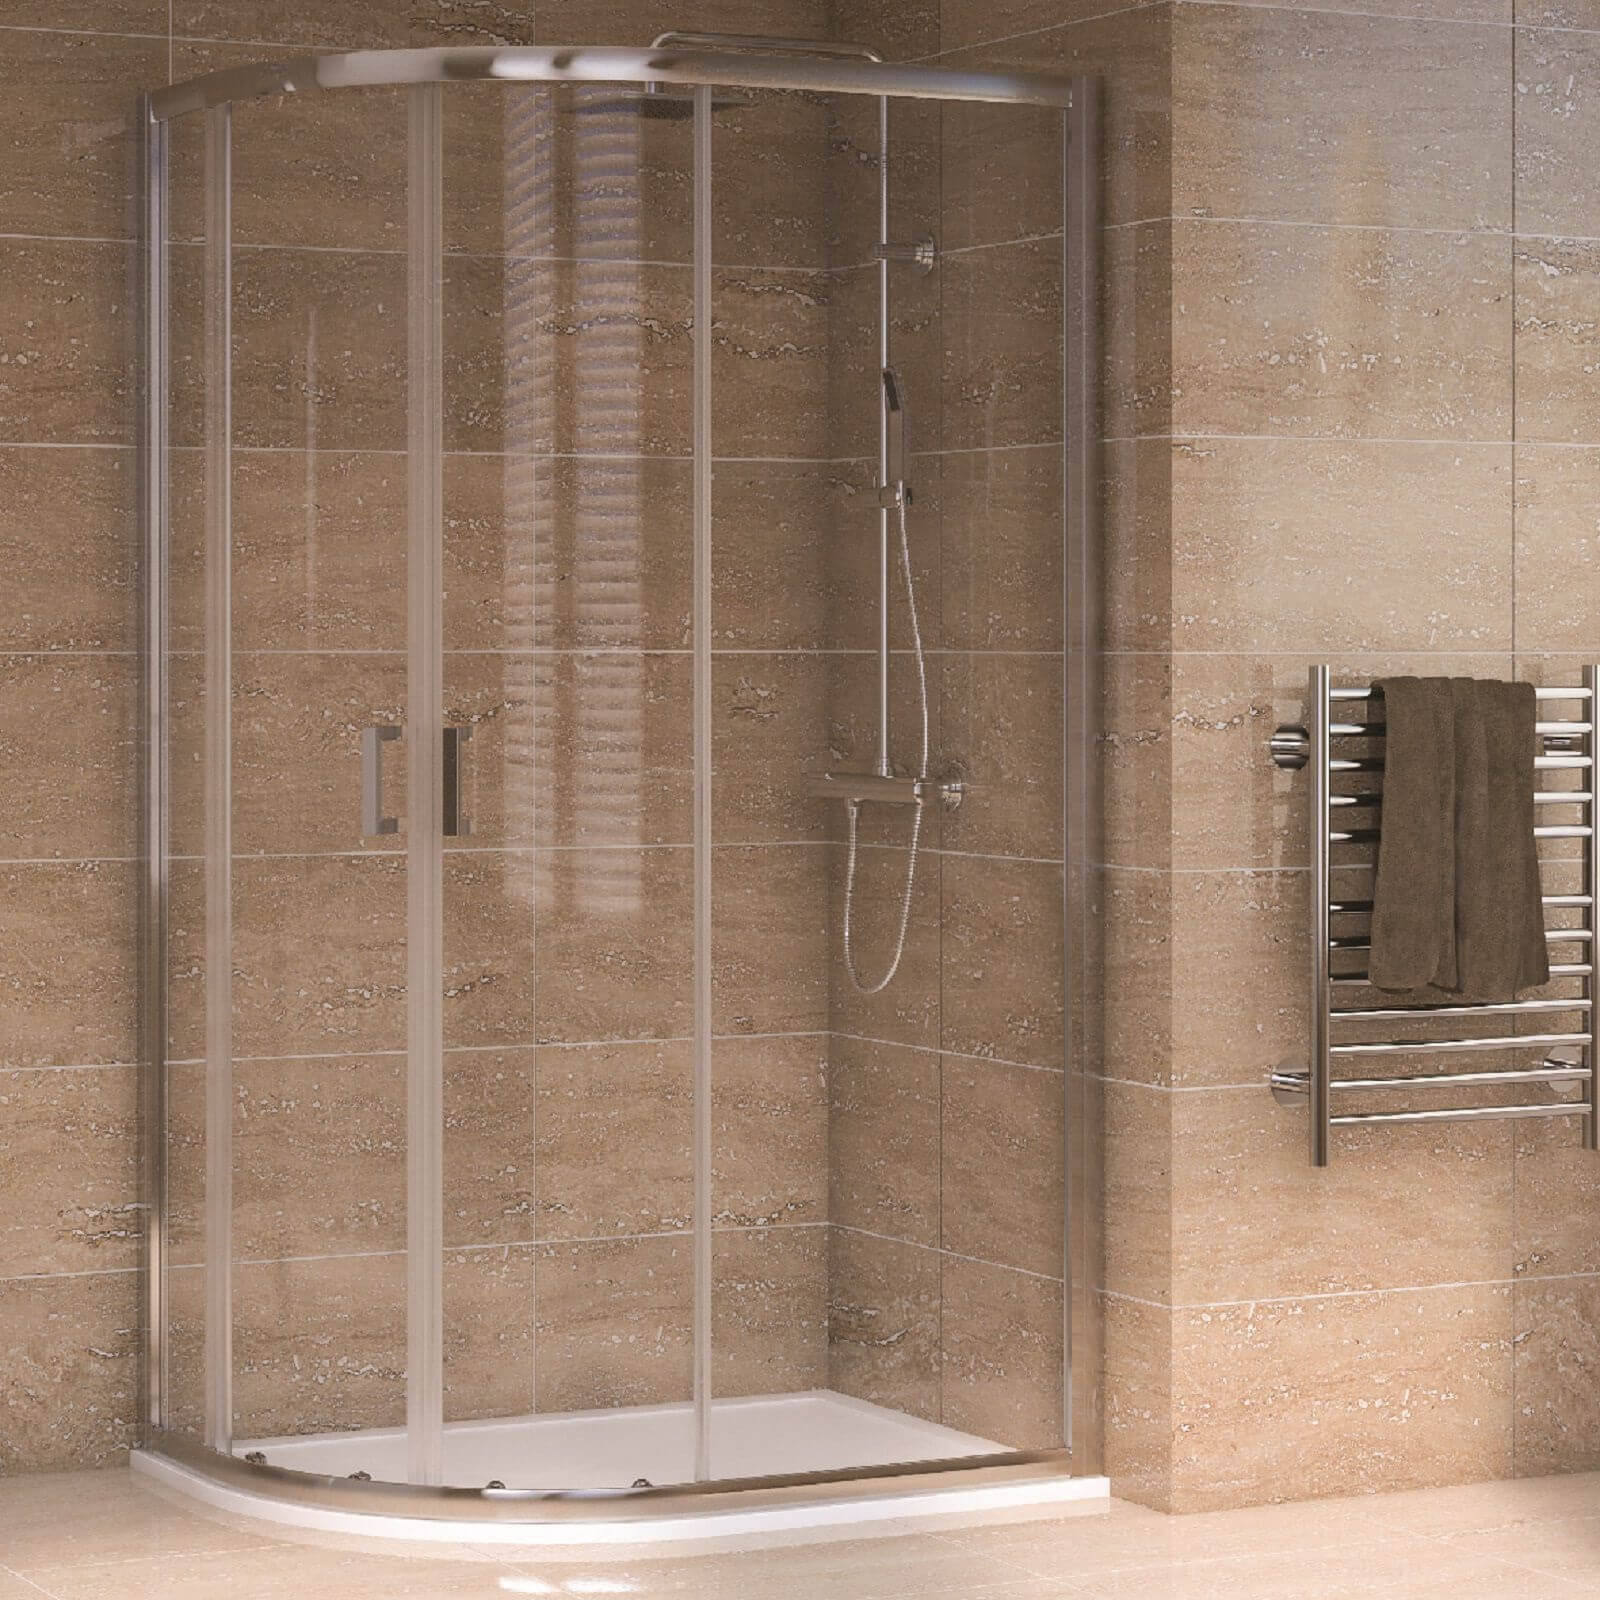 Photo of Aqualux Offset Quadrant 1000 X 800mm X 1900mm Left Hand Shower Enclosure And Tray 35mm Package